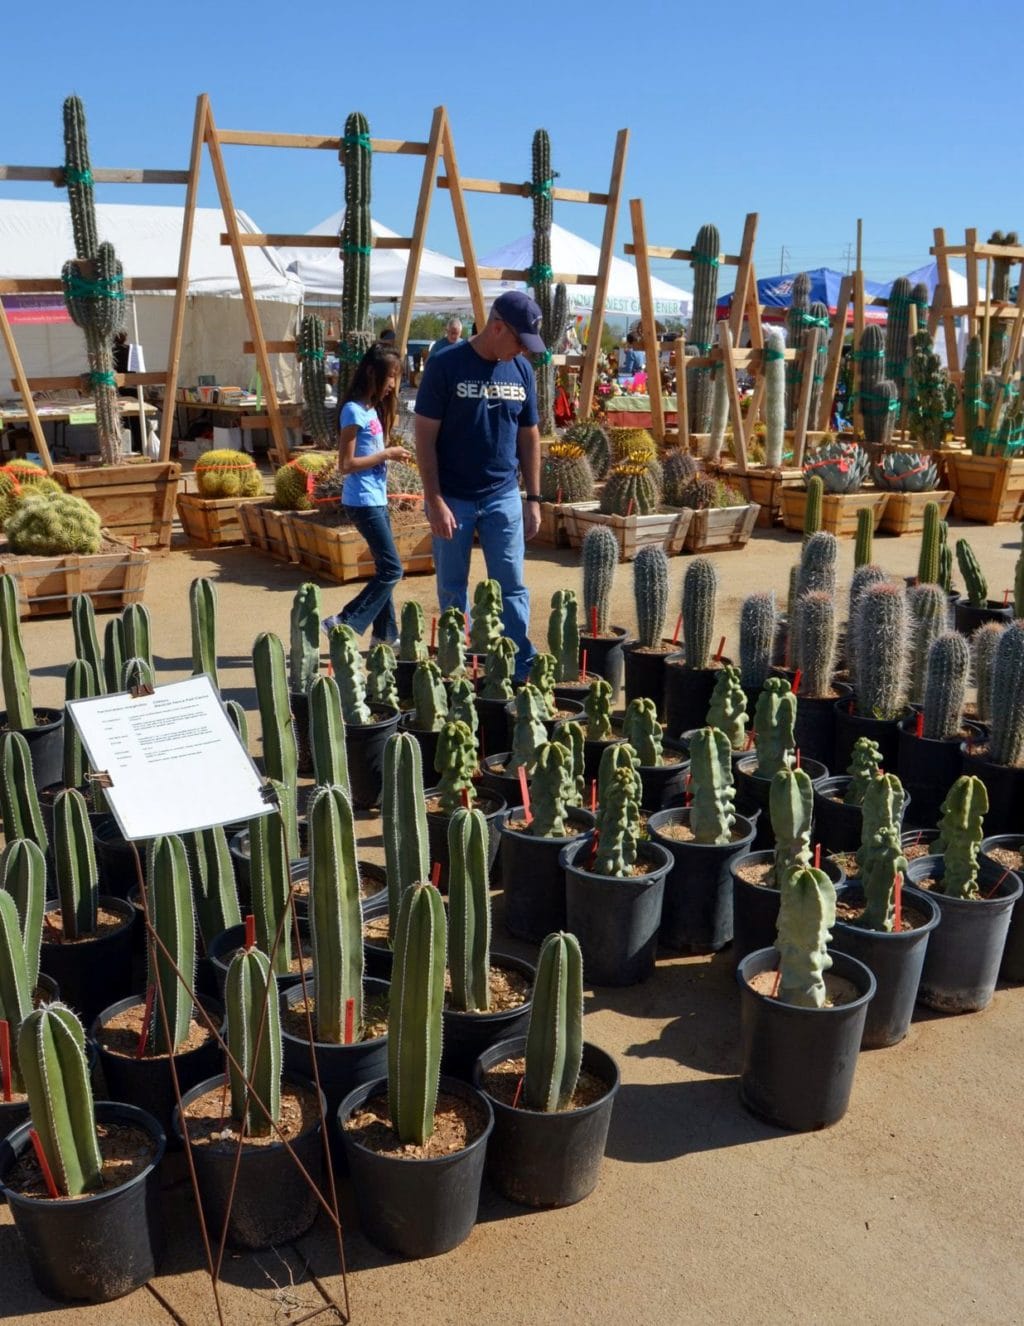 Shopping for Succulents, My husband and daughter checking out the young saguaro cacti.